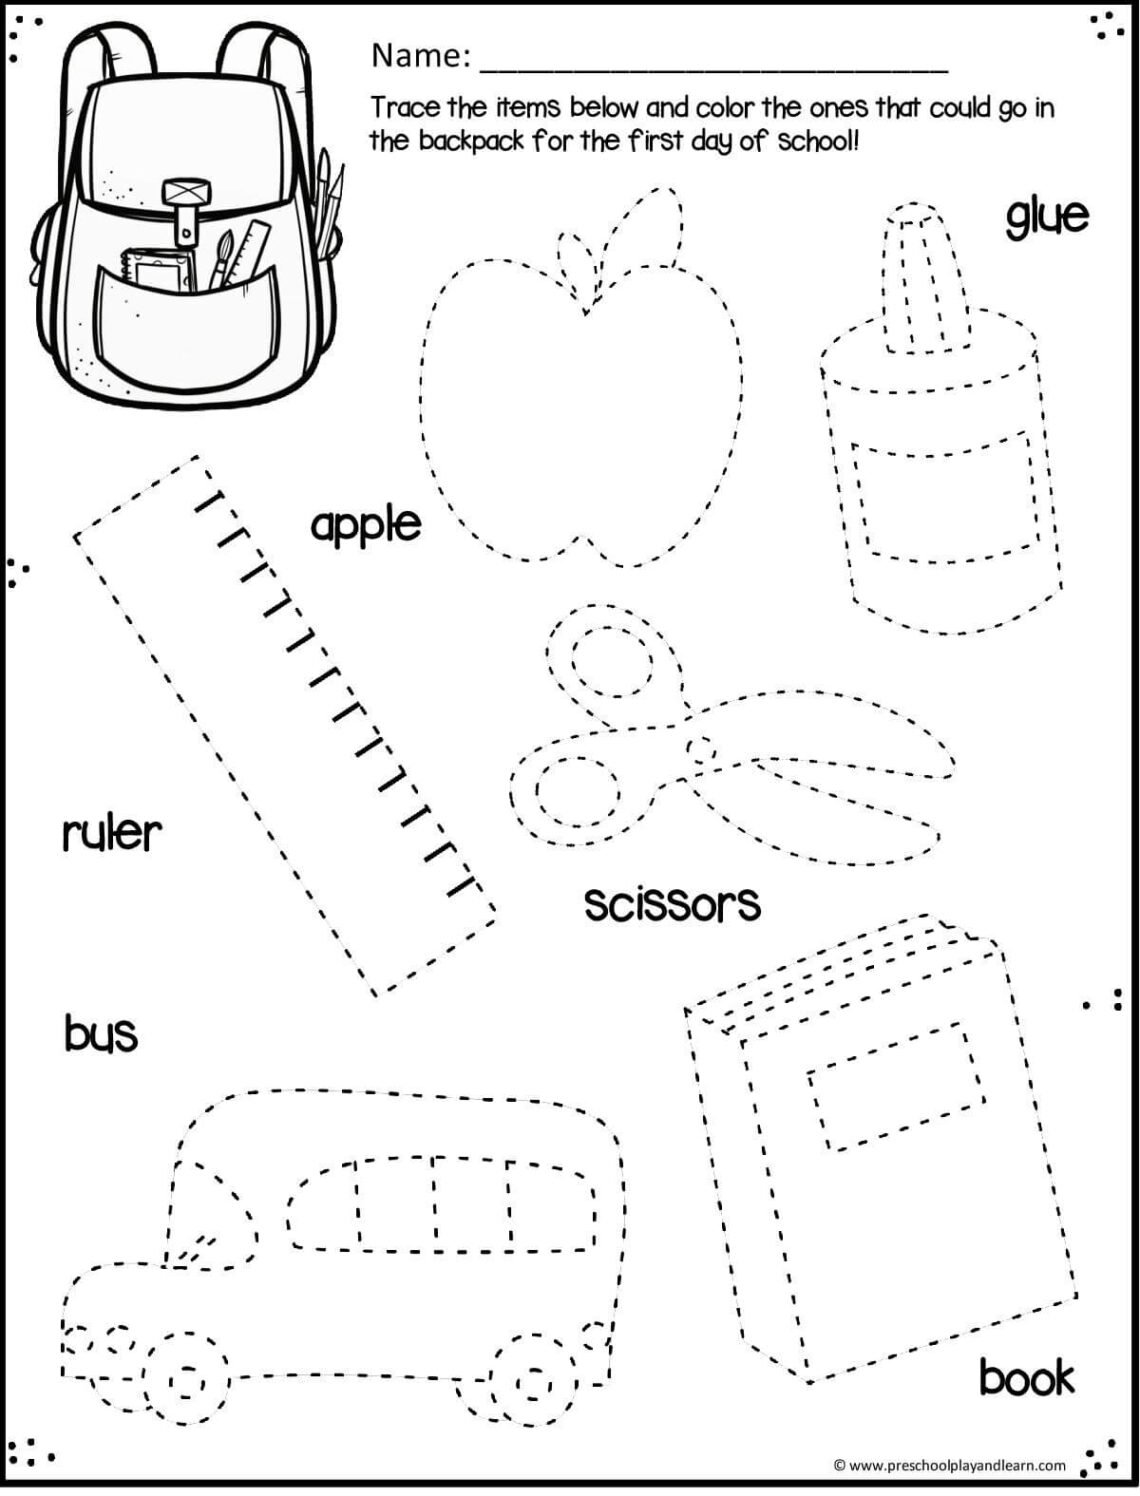 free-back-to-school-worksheets